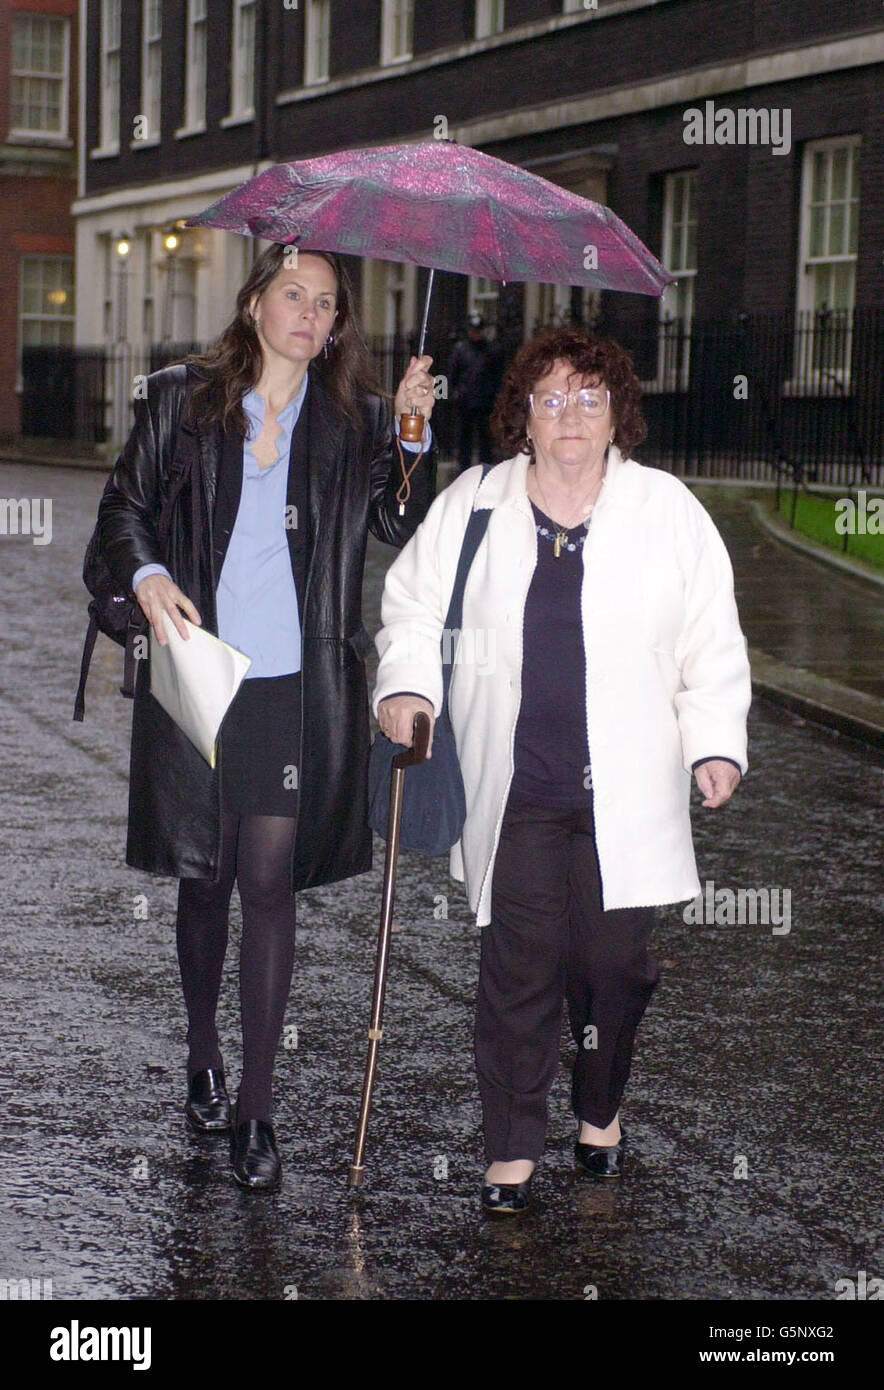 Lula Mae Pellerin (right) the mother of Tracy Housel,42, the British national facing execution on Death Row in Georgia, U.S.A. with Beth Wells (one of Tracy's US Attorneys) after delivering a letter to British Prime Minister Tony Blair at No 10 Downing Street London. *... asking him to intervene. Convicted in 1986 of murdering Jean Drew in Gwinnett County, Georgia, this week marked Tracy's 16th anniversary on Death Row and fears are that he will be executed next month unless Mr Blair makes a personal representation to the US authorities. Stock Photo